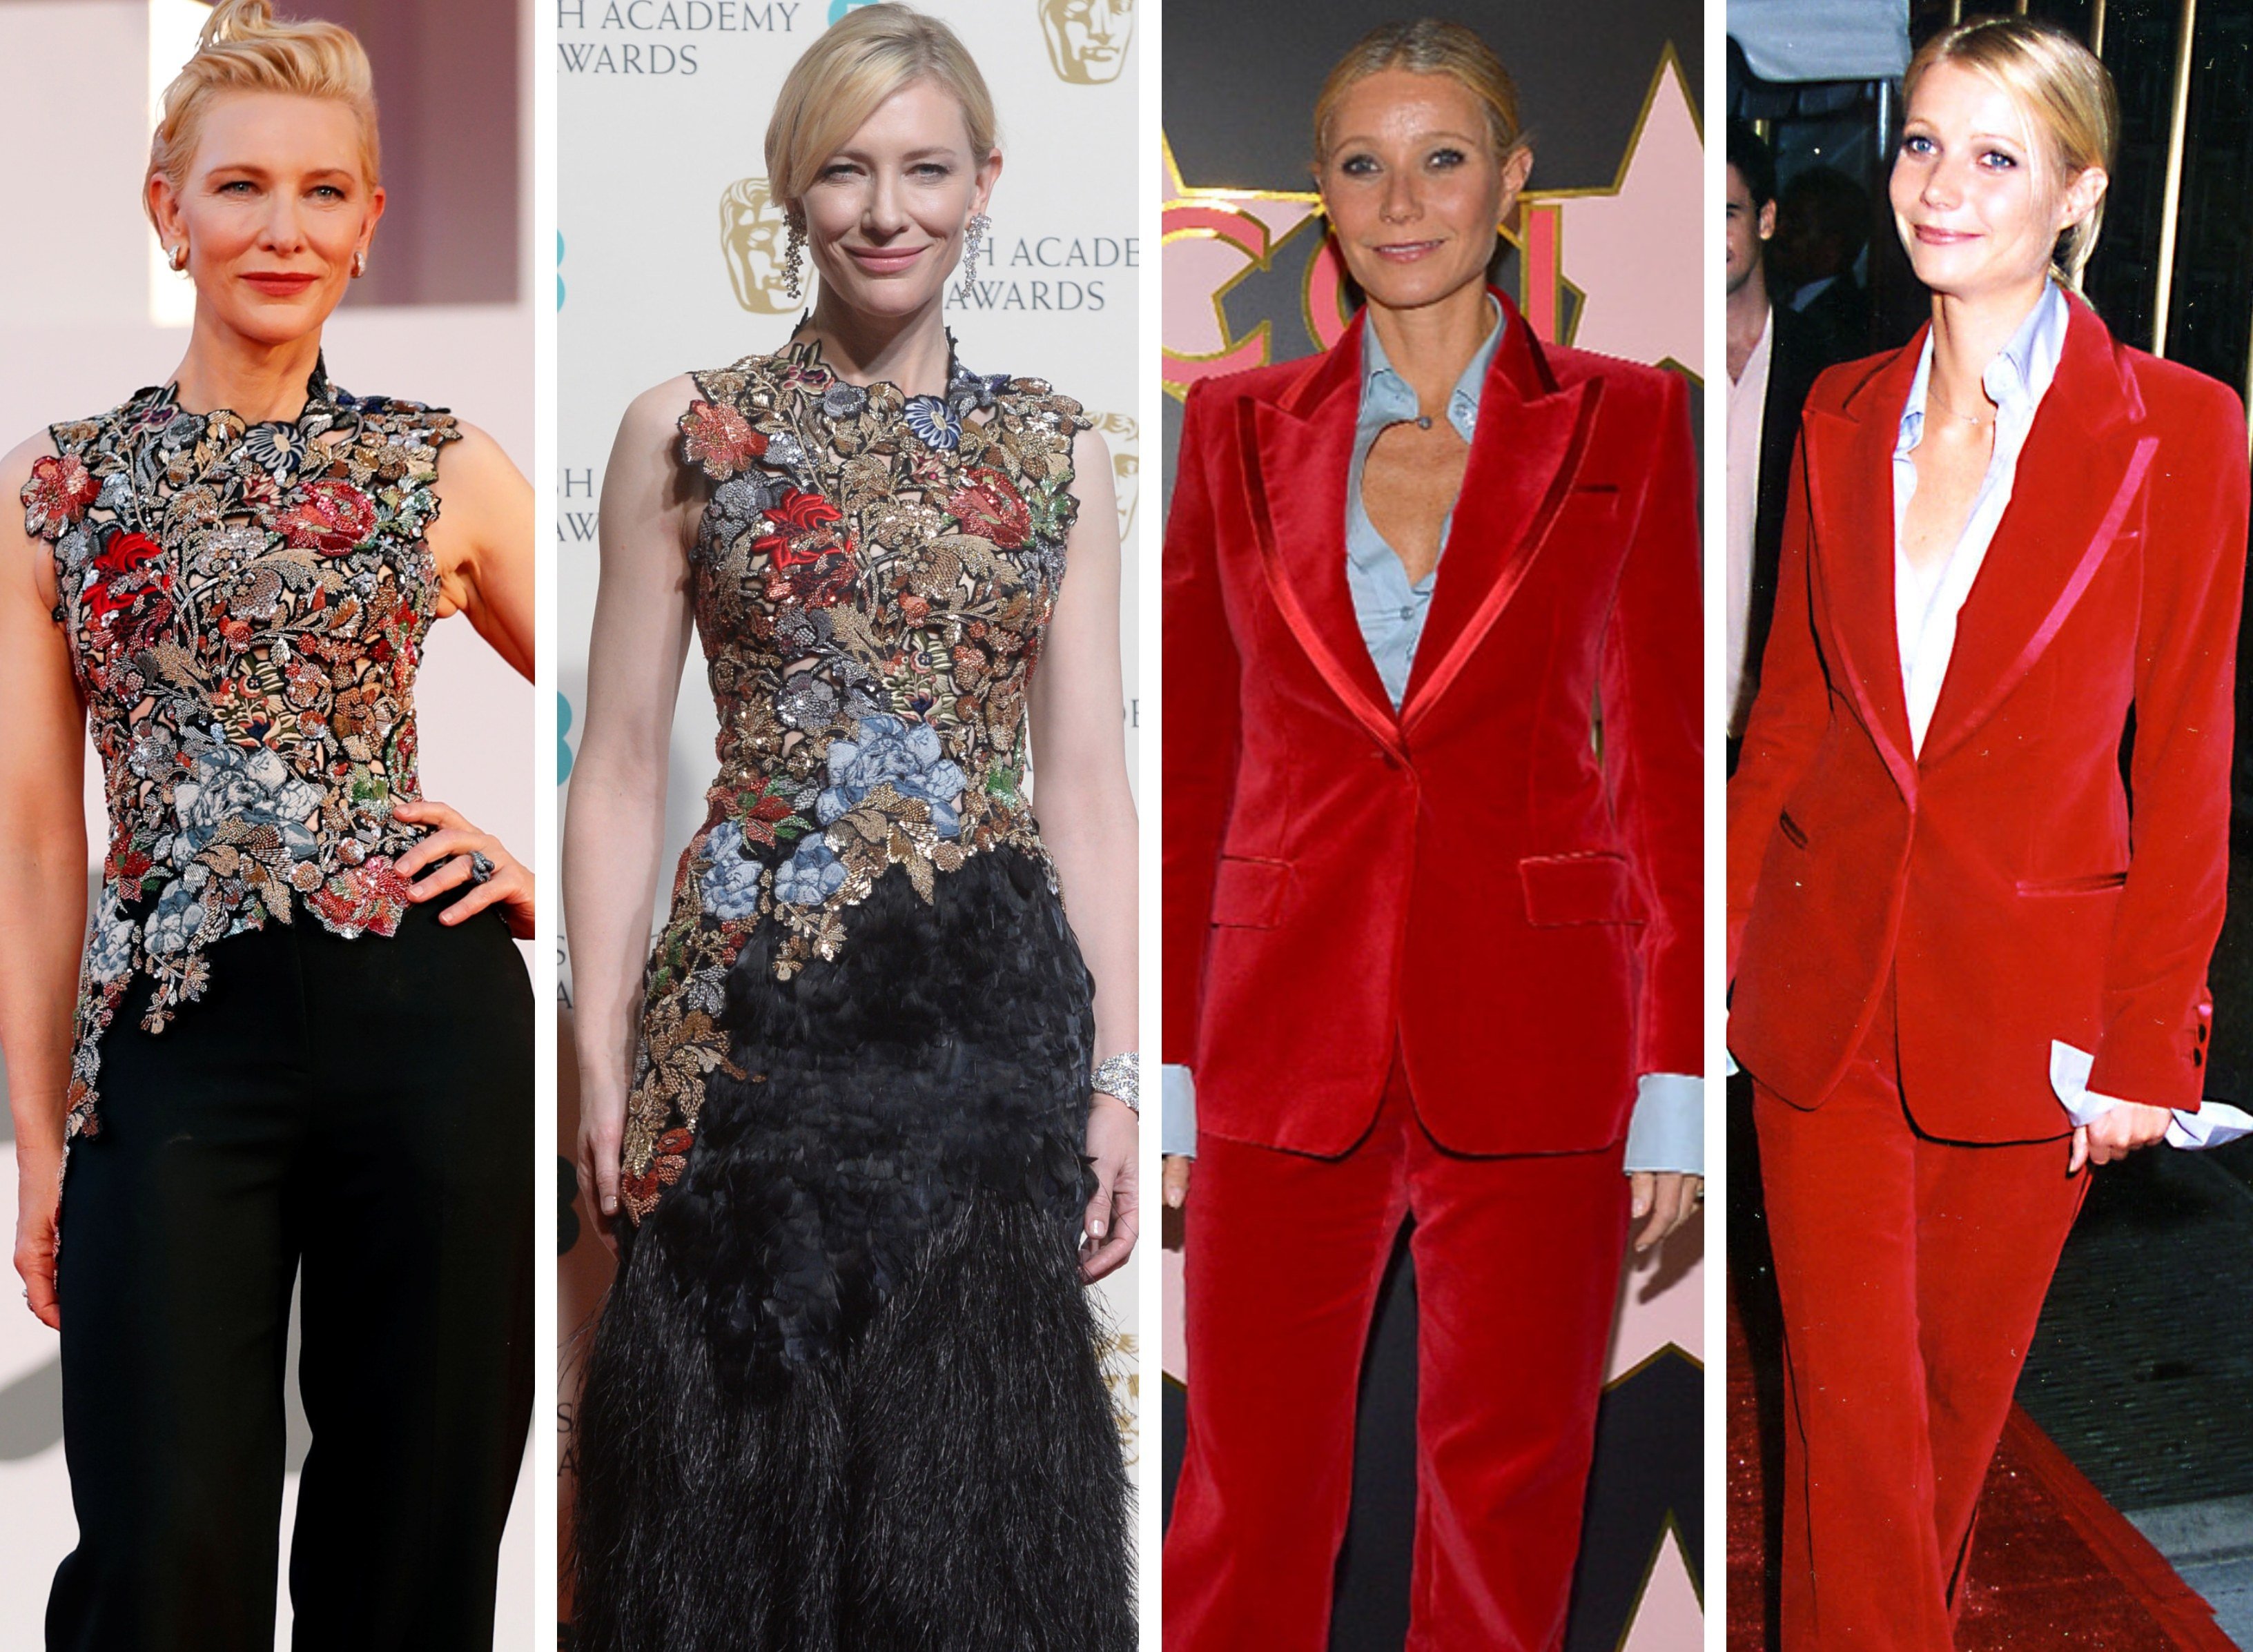 Celebrities including Cate Blanchett and Gwyneth Paltrow have re-worn outfits from their past. Photos: Reuters; Getty Images; FilmMagic